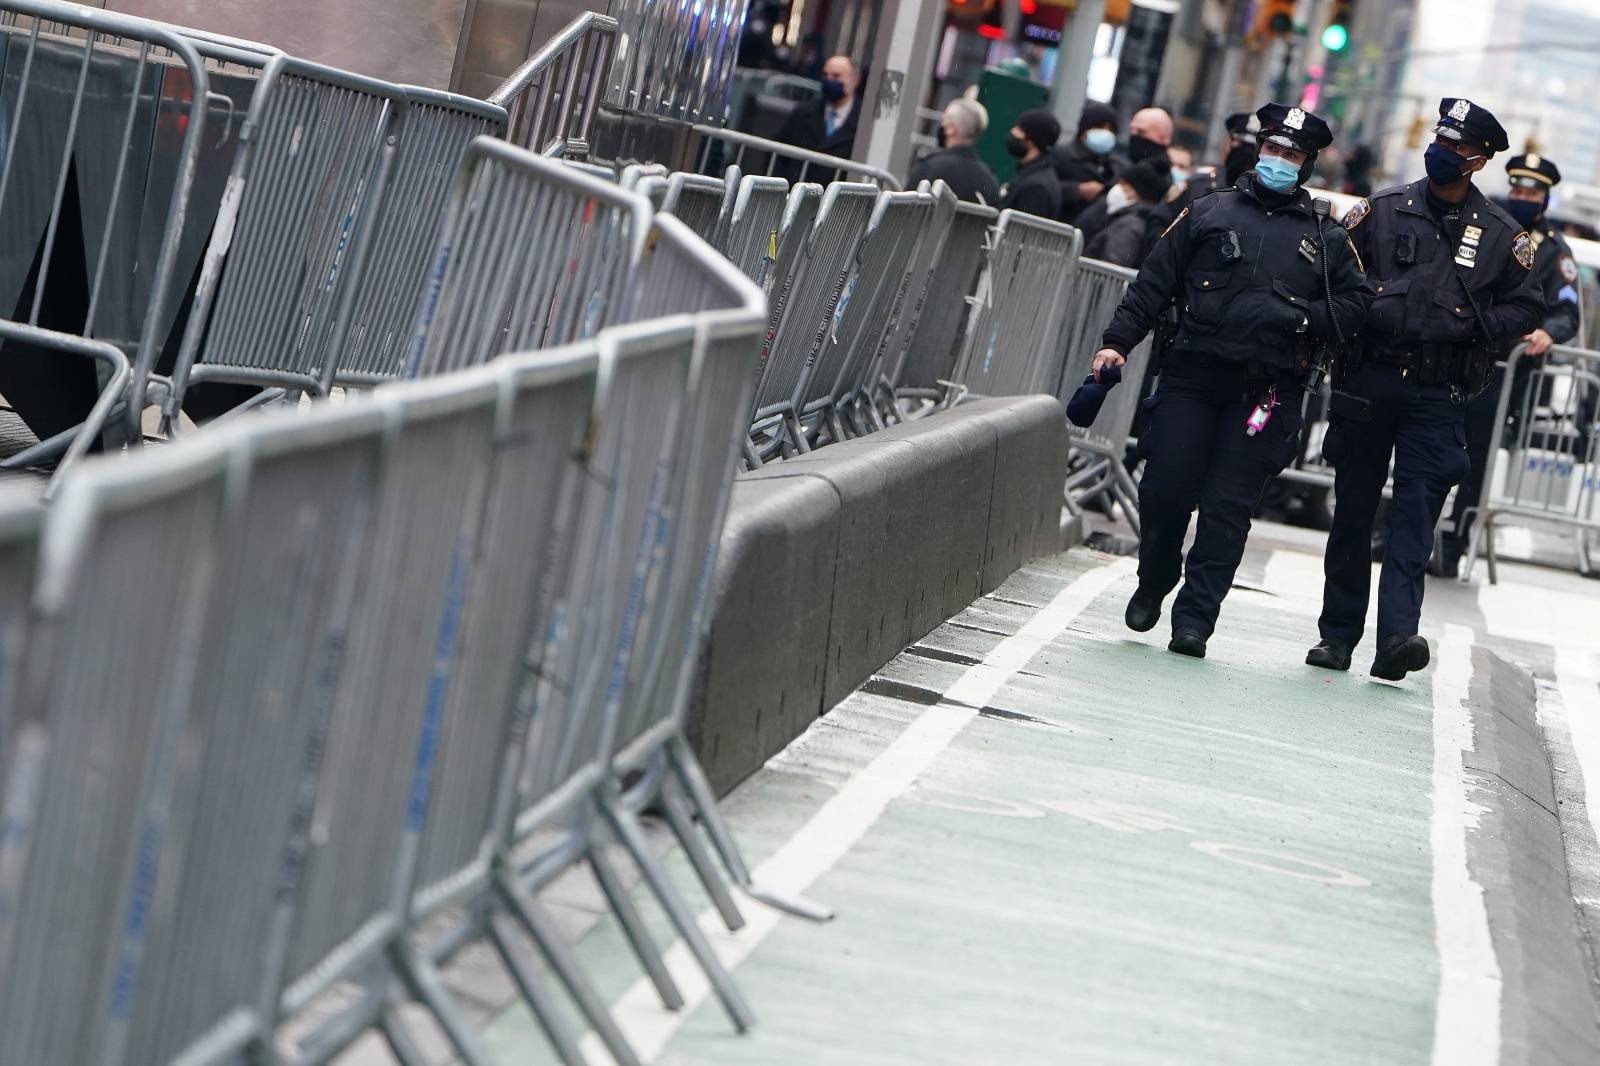 Police walk checkpoints to prevent people from entering Times Square ahead of New Year's Eve